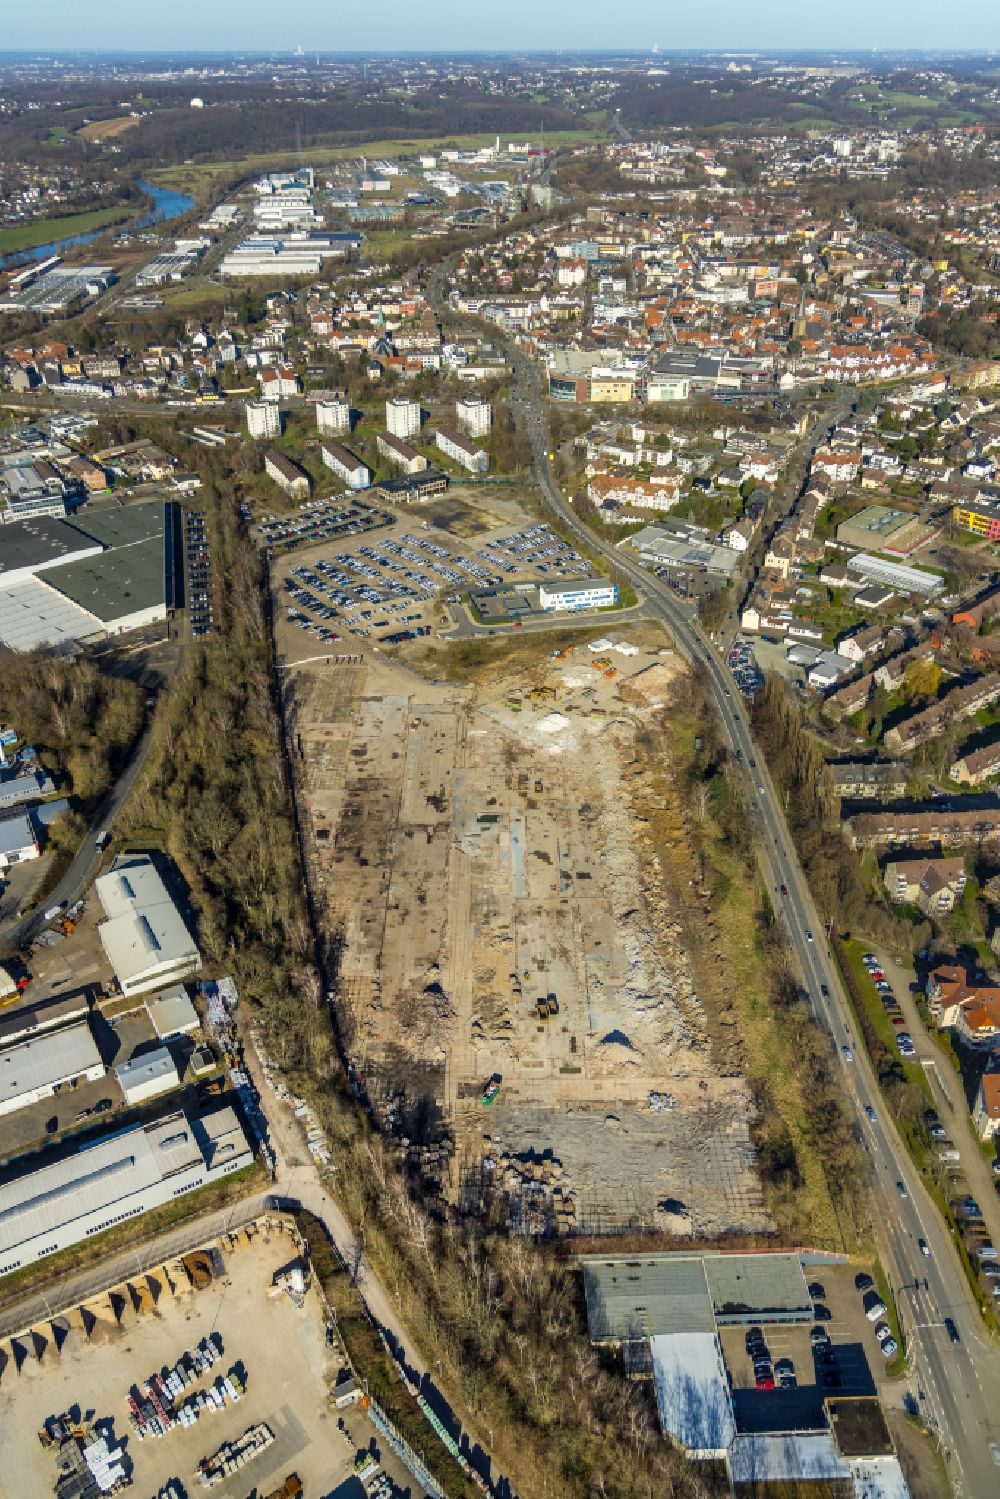 Aerial image Hattingen - Demolition area for the new construction of commercial and residential buildings on the former O&K site with a new parking lot and police station along kidney Hofer Strasse in Hattingen in the state North Rhine-Westphalia, Germany